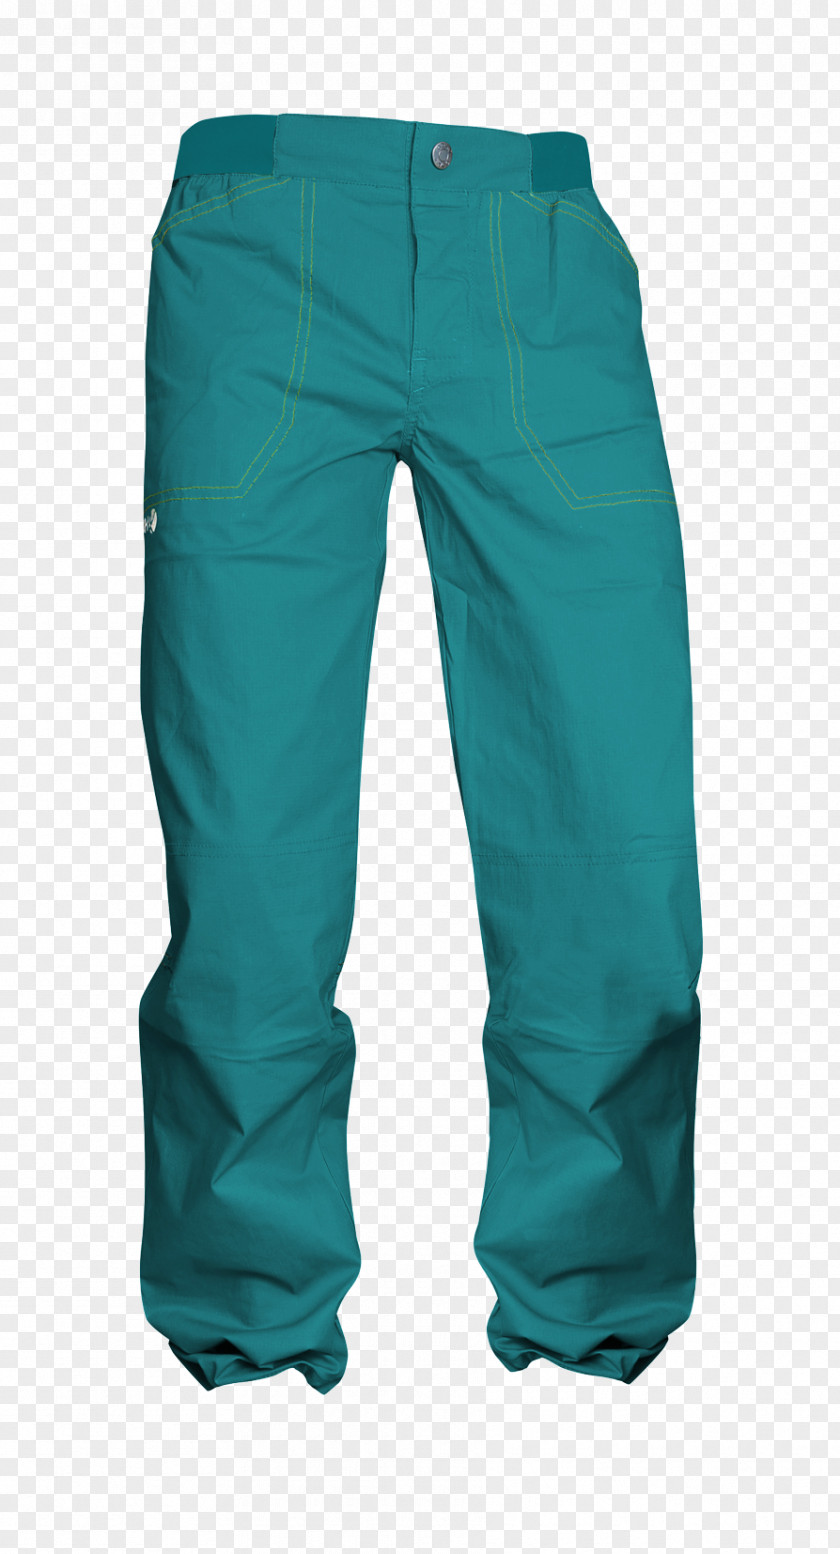 Jeans Cargo Pants Chino Cloth Denim PNG